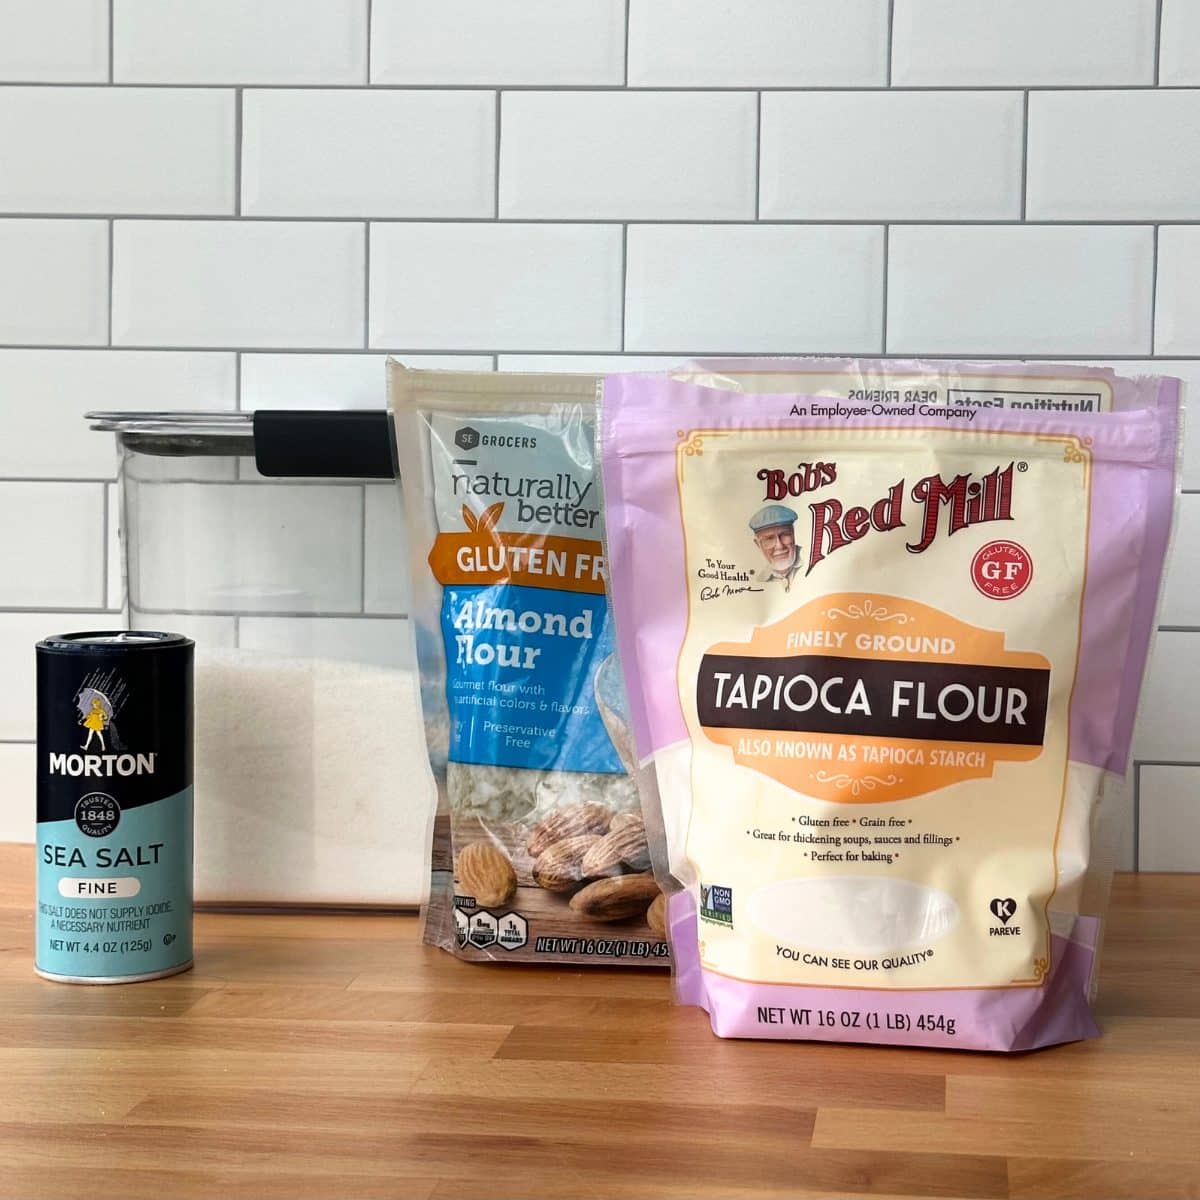 Ingredients to make gluten free vegan pie crust: fine sea salt, sugar, almond flour, and tapioca flour. Ingredients are on a wood surface with white subway tile wall in back.